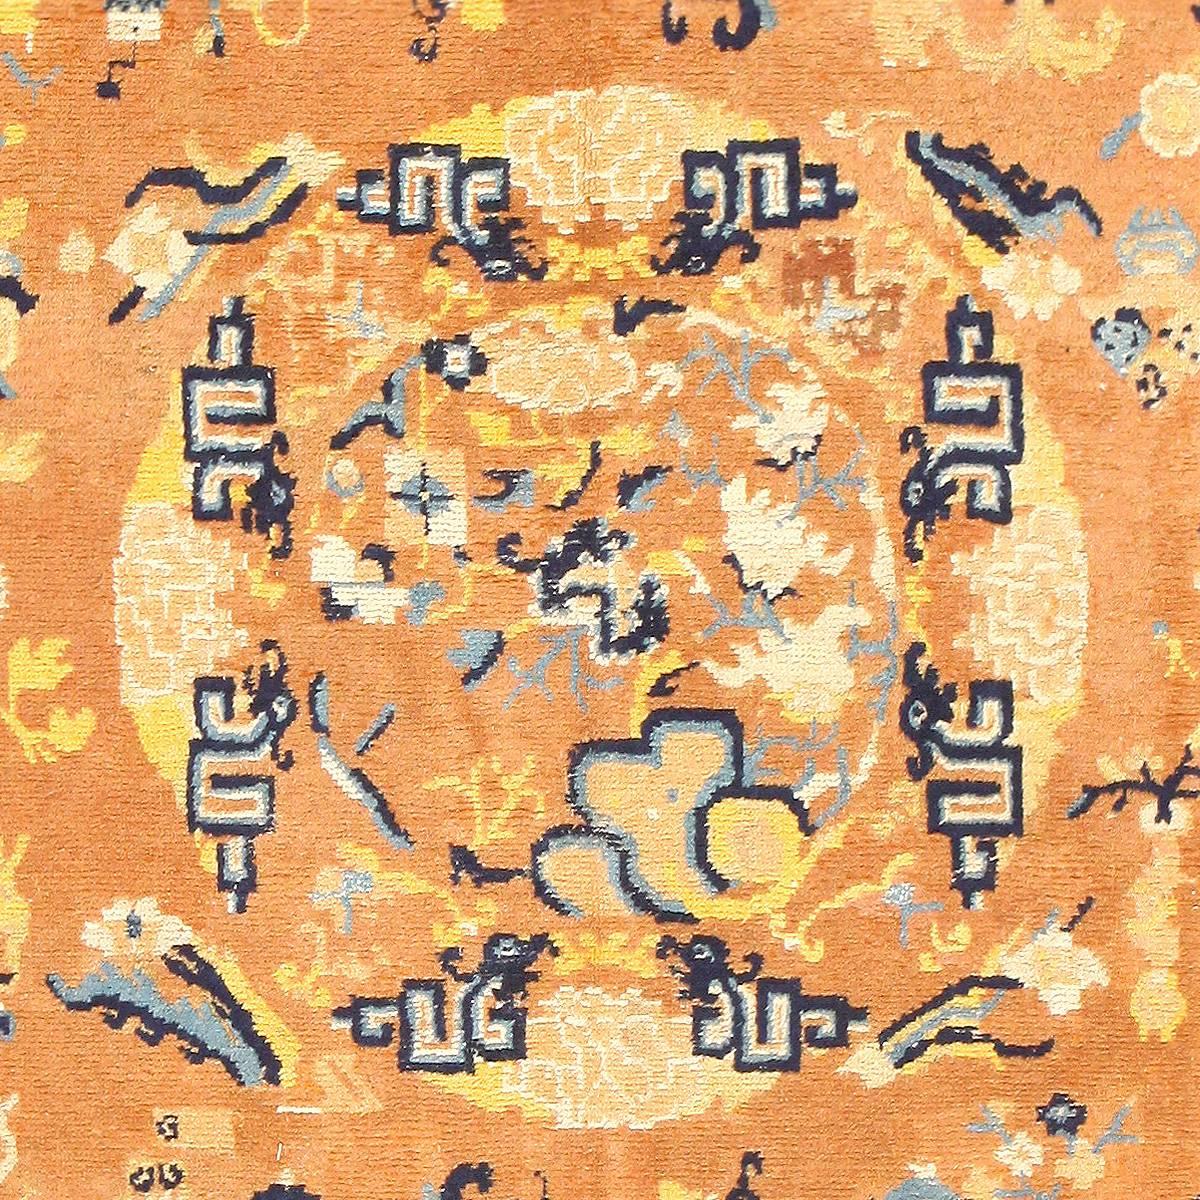 Late 17th Century Chinese Ningxia Rug, Country of Origin / Rug Type: China Rugs, Circa Date: Late 17th Century – Size: 6 ft 2 in x 12 ft (1.88 m x 3.66 m)

Unlike many traditional Chinese rugs, this one is unique in the way it establishes closer